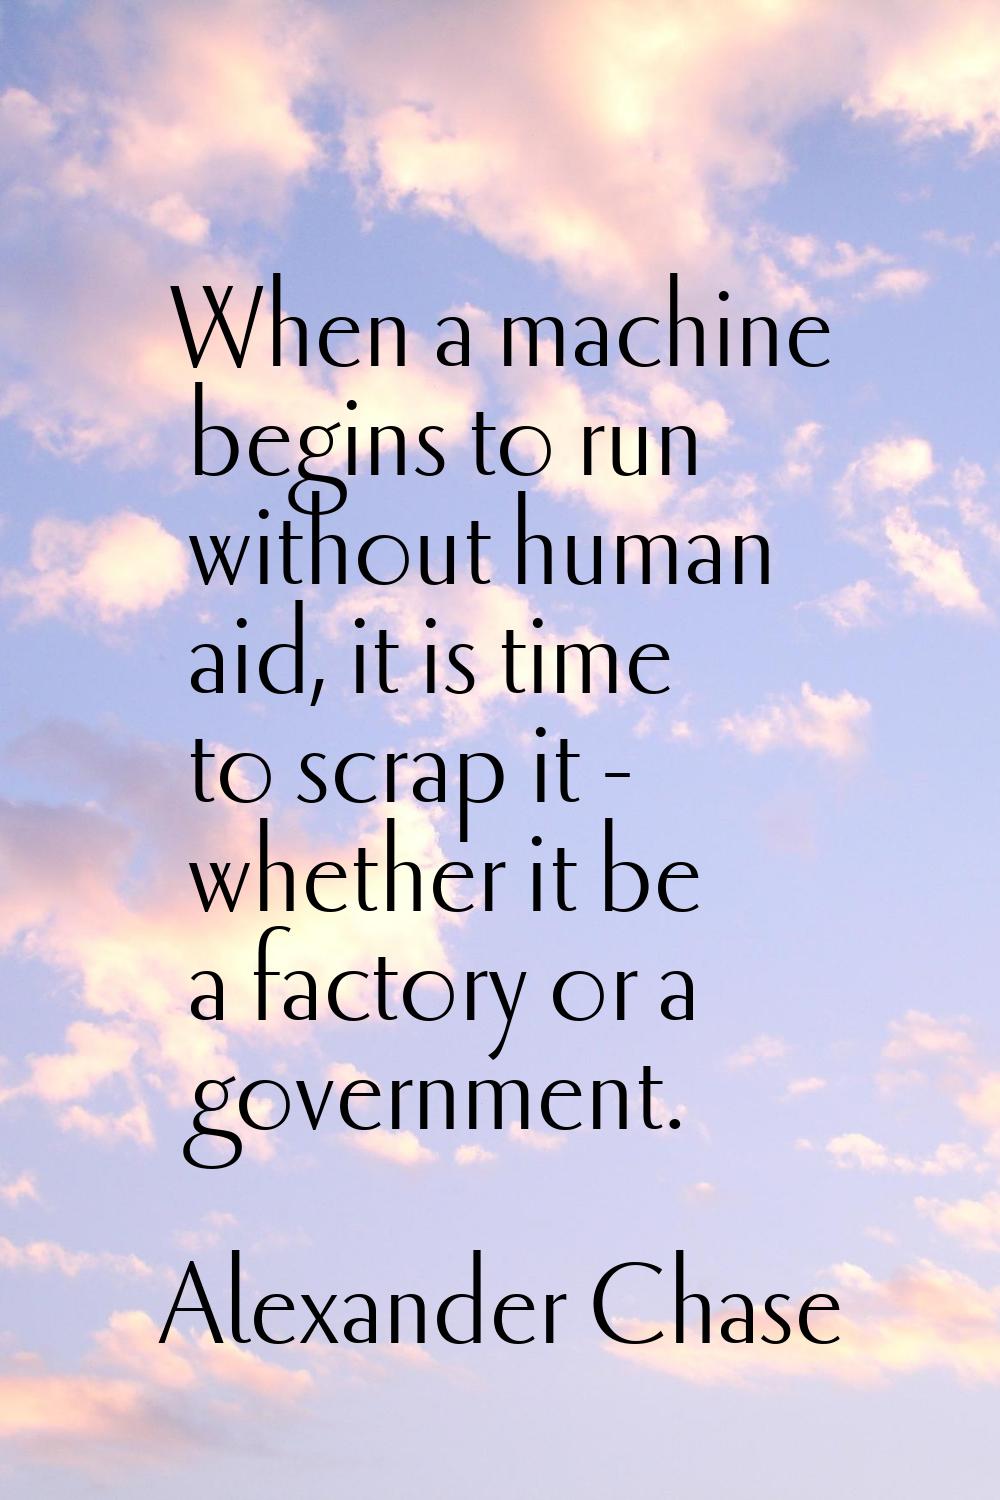 When a machine begins to run without human aid, it is time to scrap it - whether it be a factory or